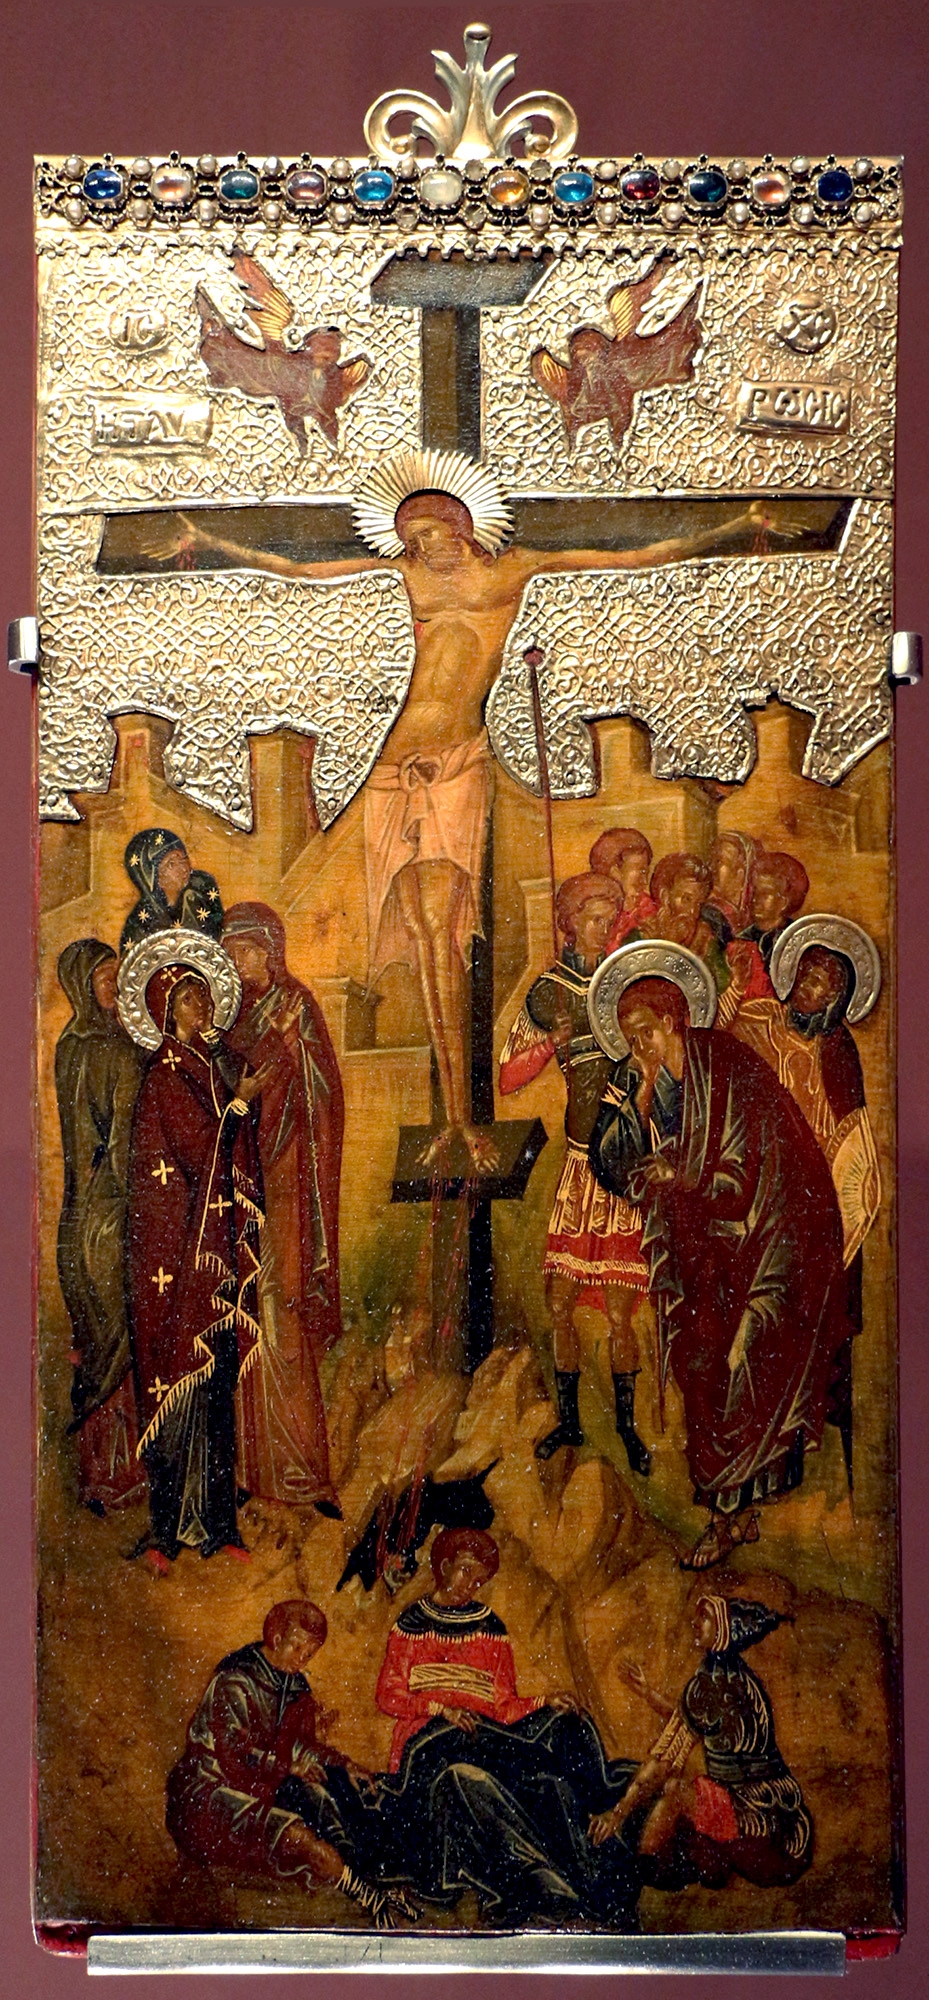 On the painted cover of a reliquary with some metalwork, a man on a cross surrounded by other figures in a landscape with buildings in the background.